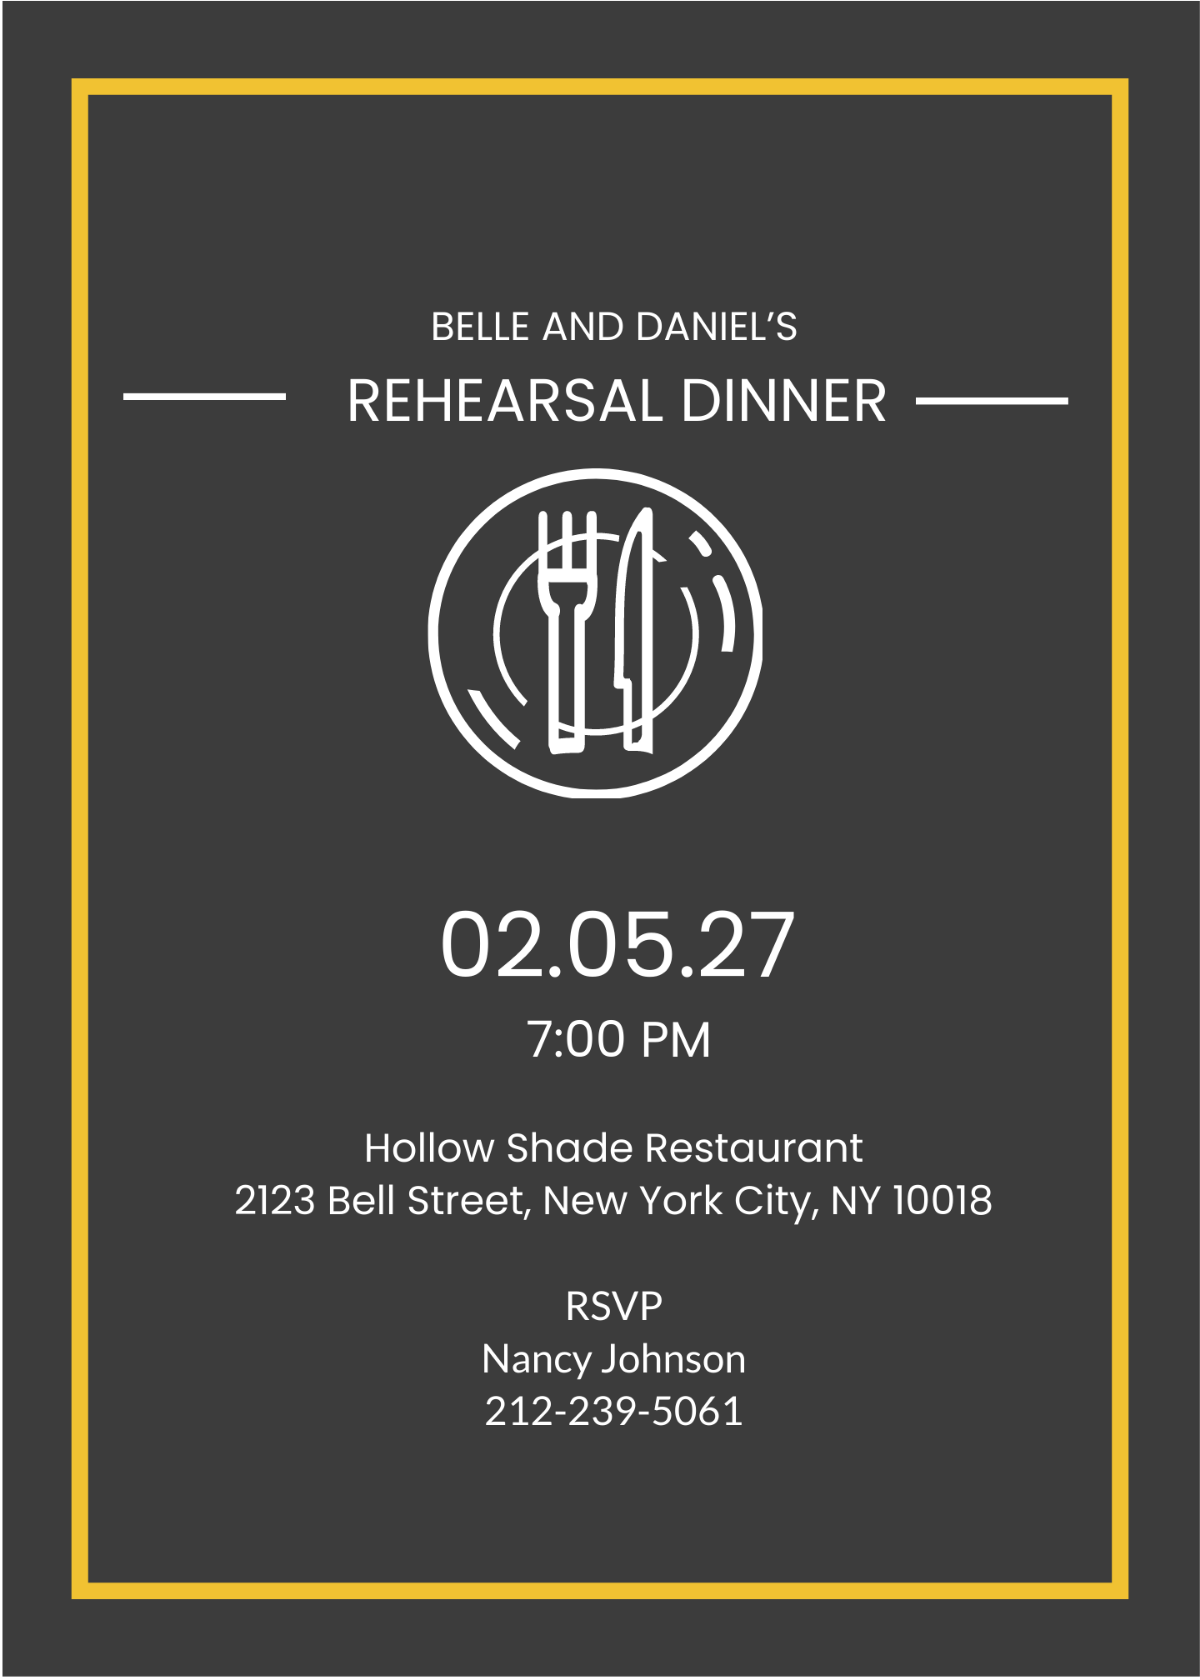 Rehearsal Dinner Party Invitation Template